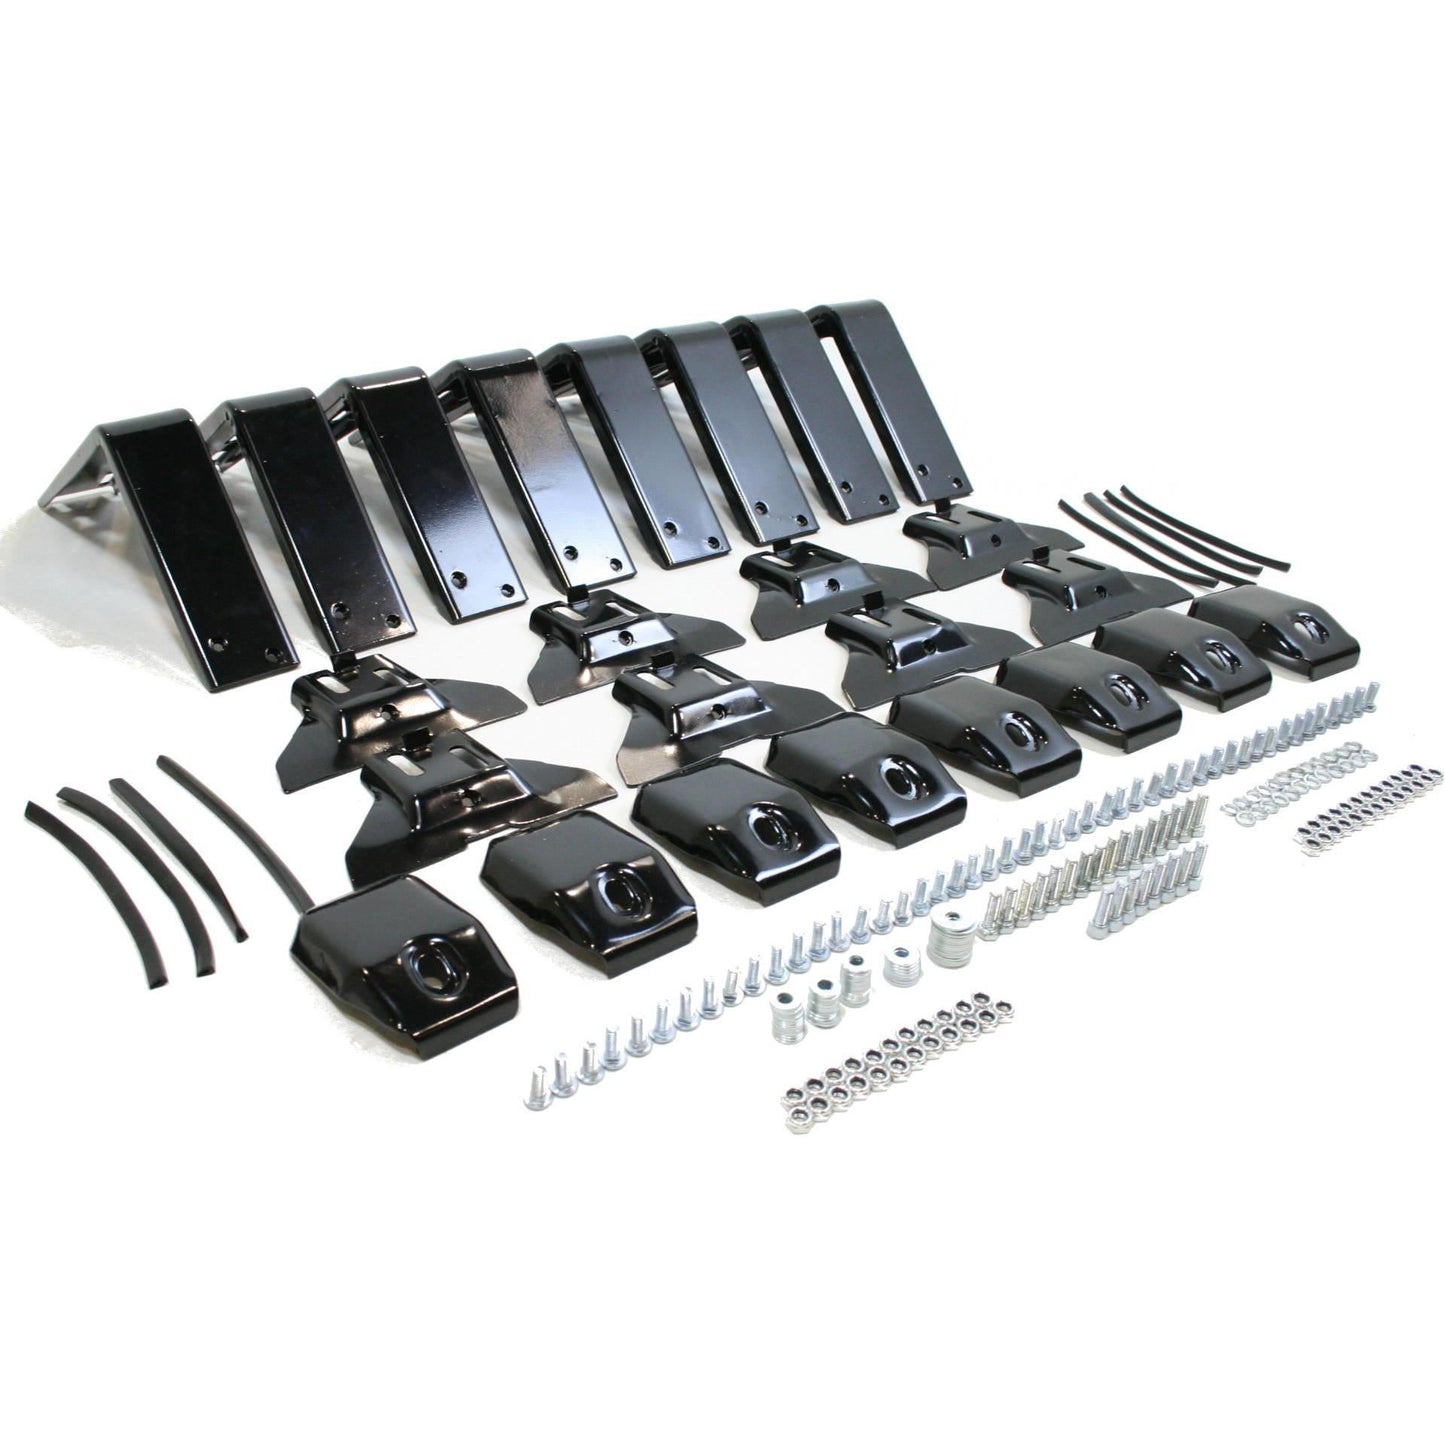 Replacement 5-inch Brackets for Direct4x4 Expedition Roof Racks